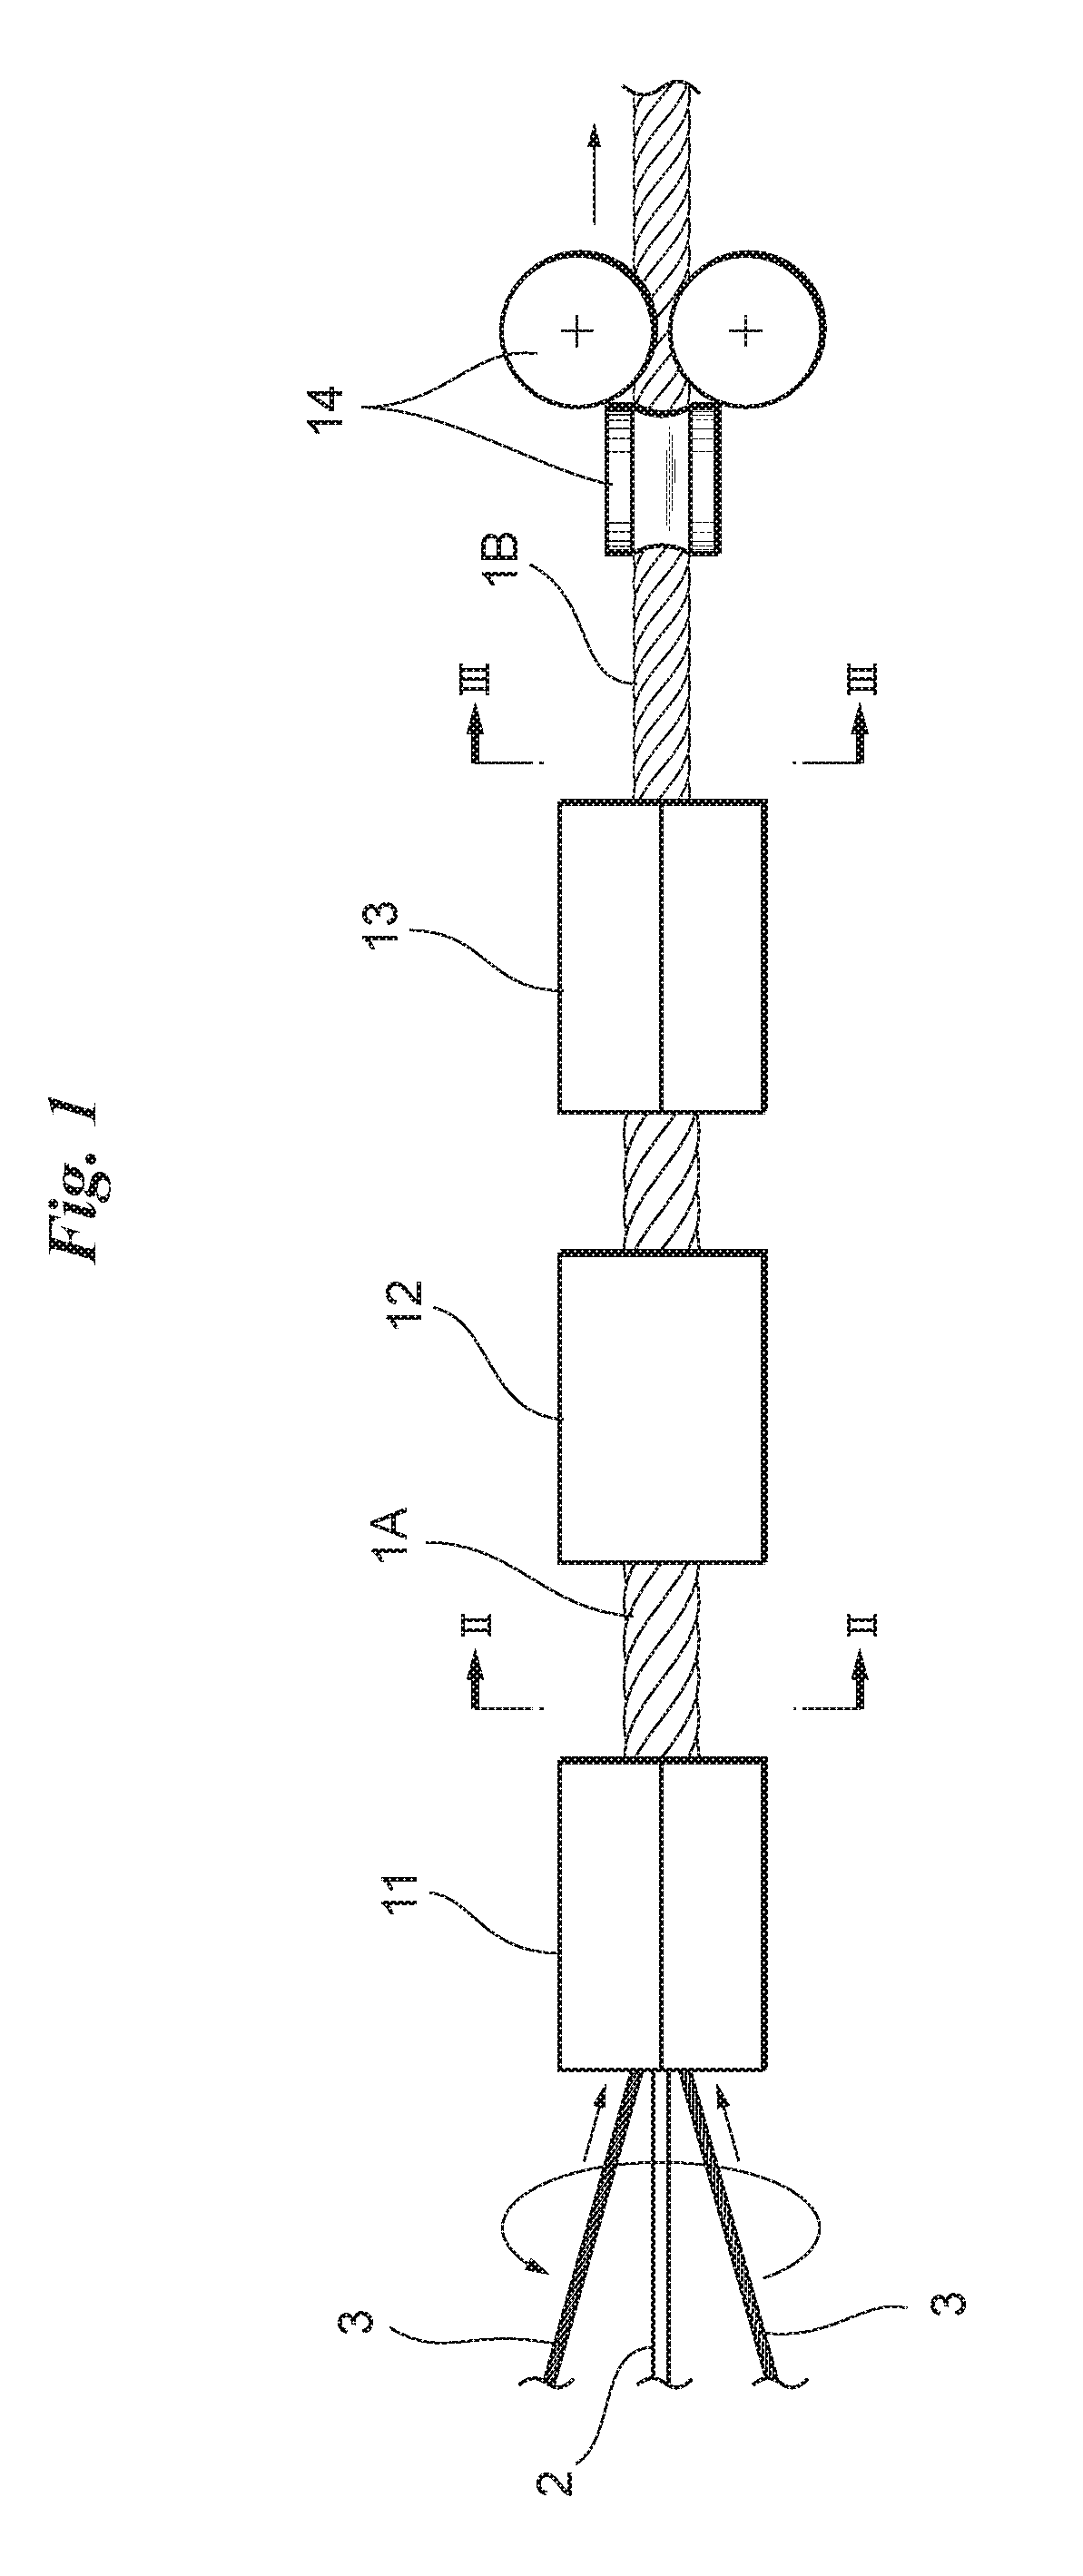 Running wire rope and method of manufacturing same